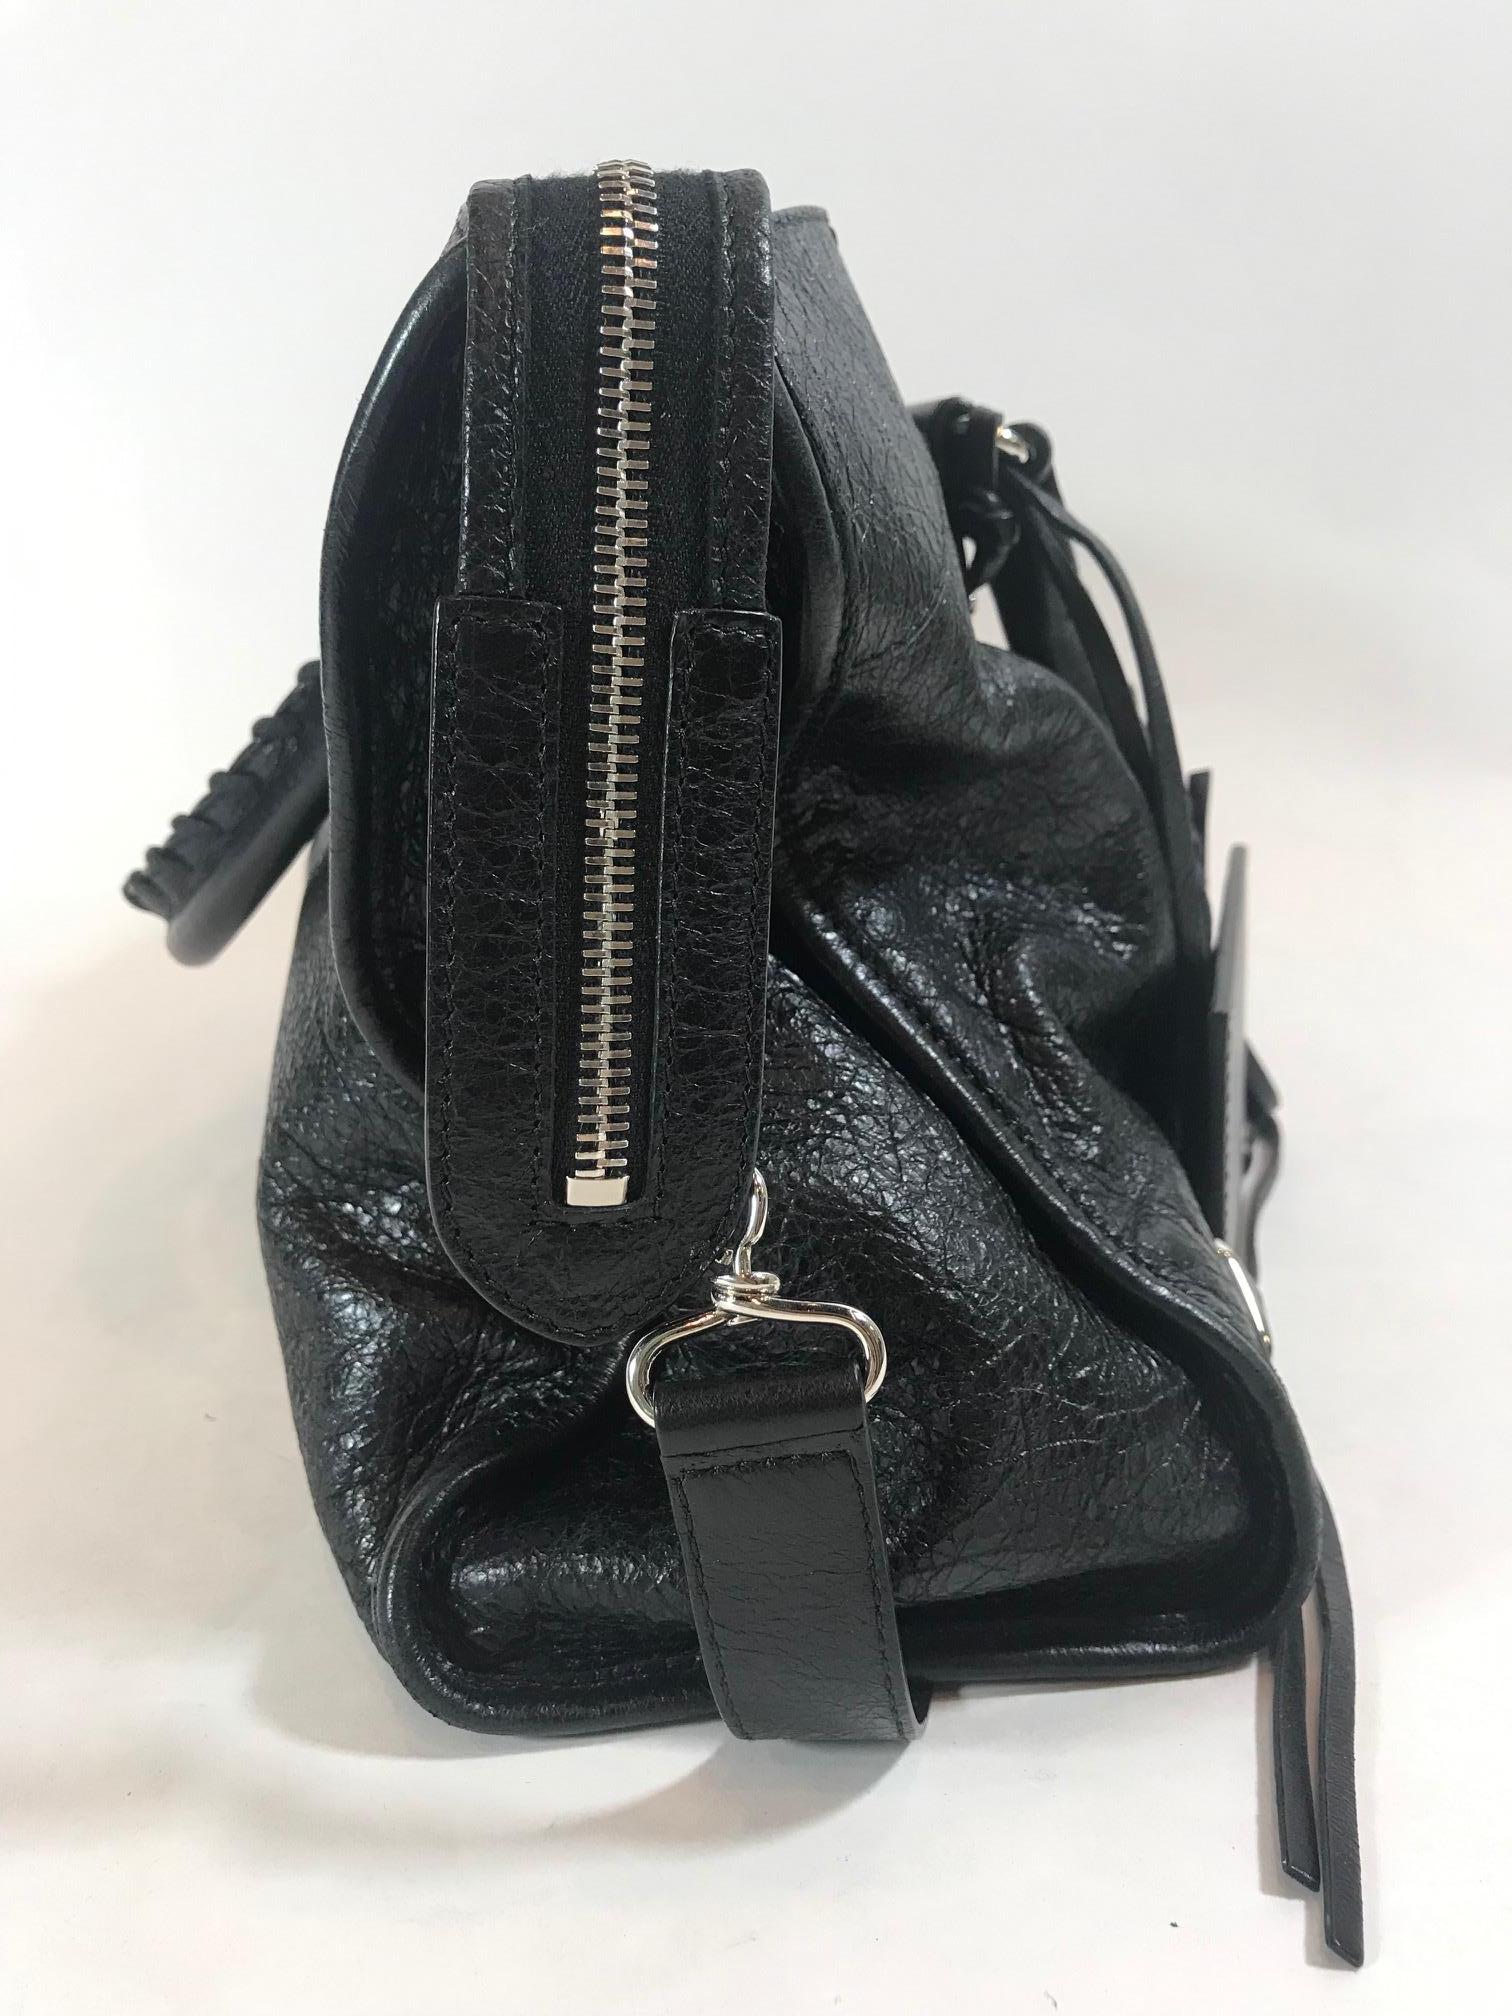 Balenciaga Motocross Giant 12 City Bag In Excellent Condition For Sale In Roslyn, NY